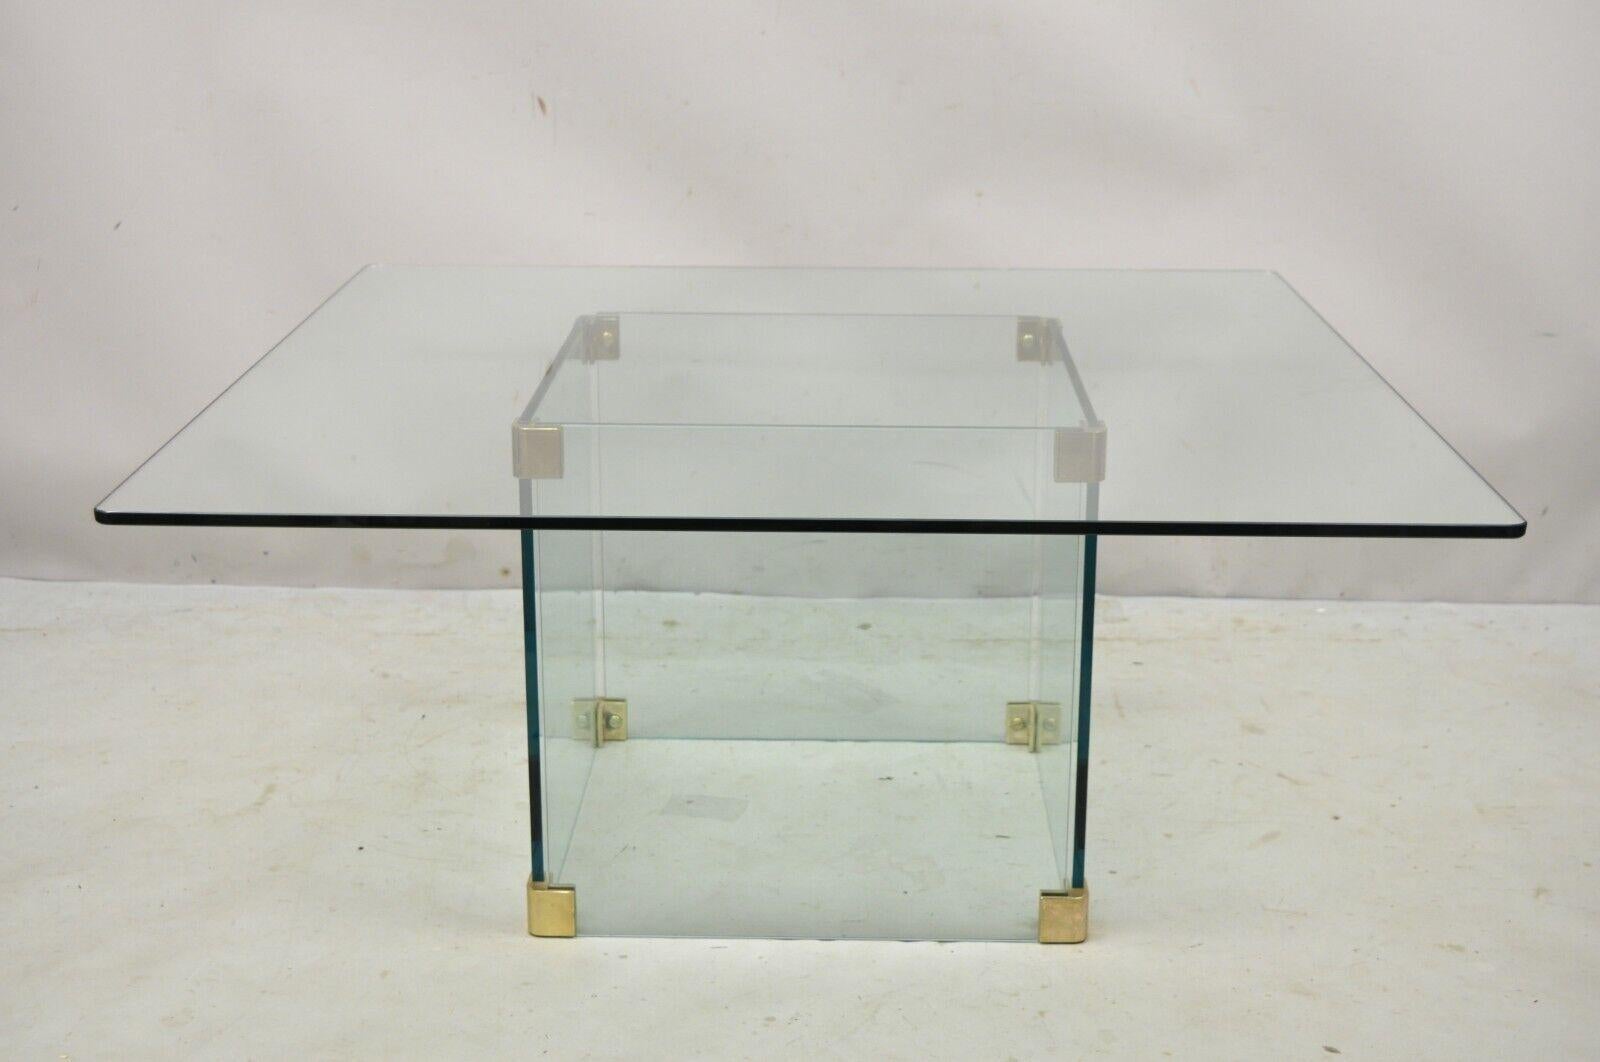 Vintage Mid-Century Modernist pace glass coffee table with glass pedestal base. Item features brass accents, glass base and top, very nice vintage item, clean modernist line, attributed to Leon Rosen for Pace, circa late 20th century. Measurements: